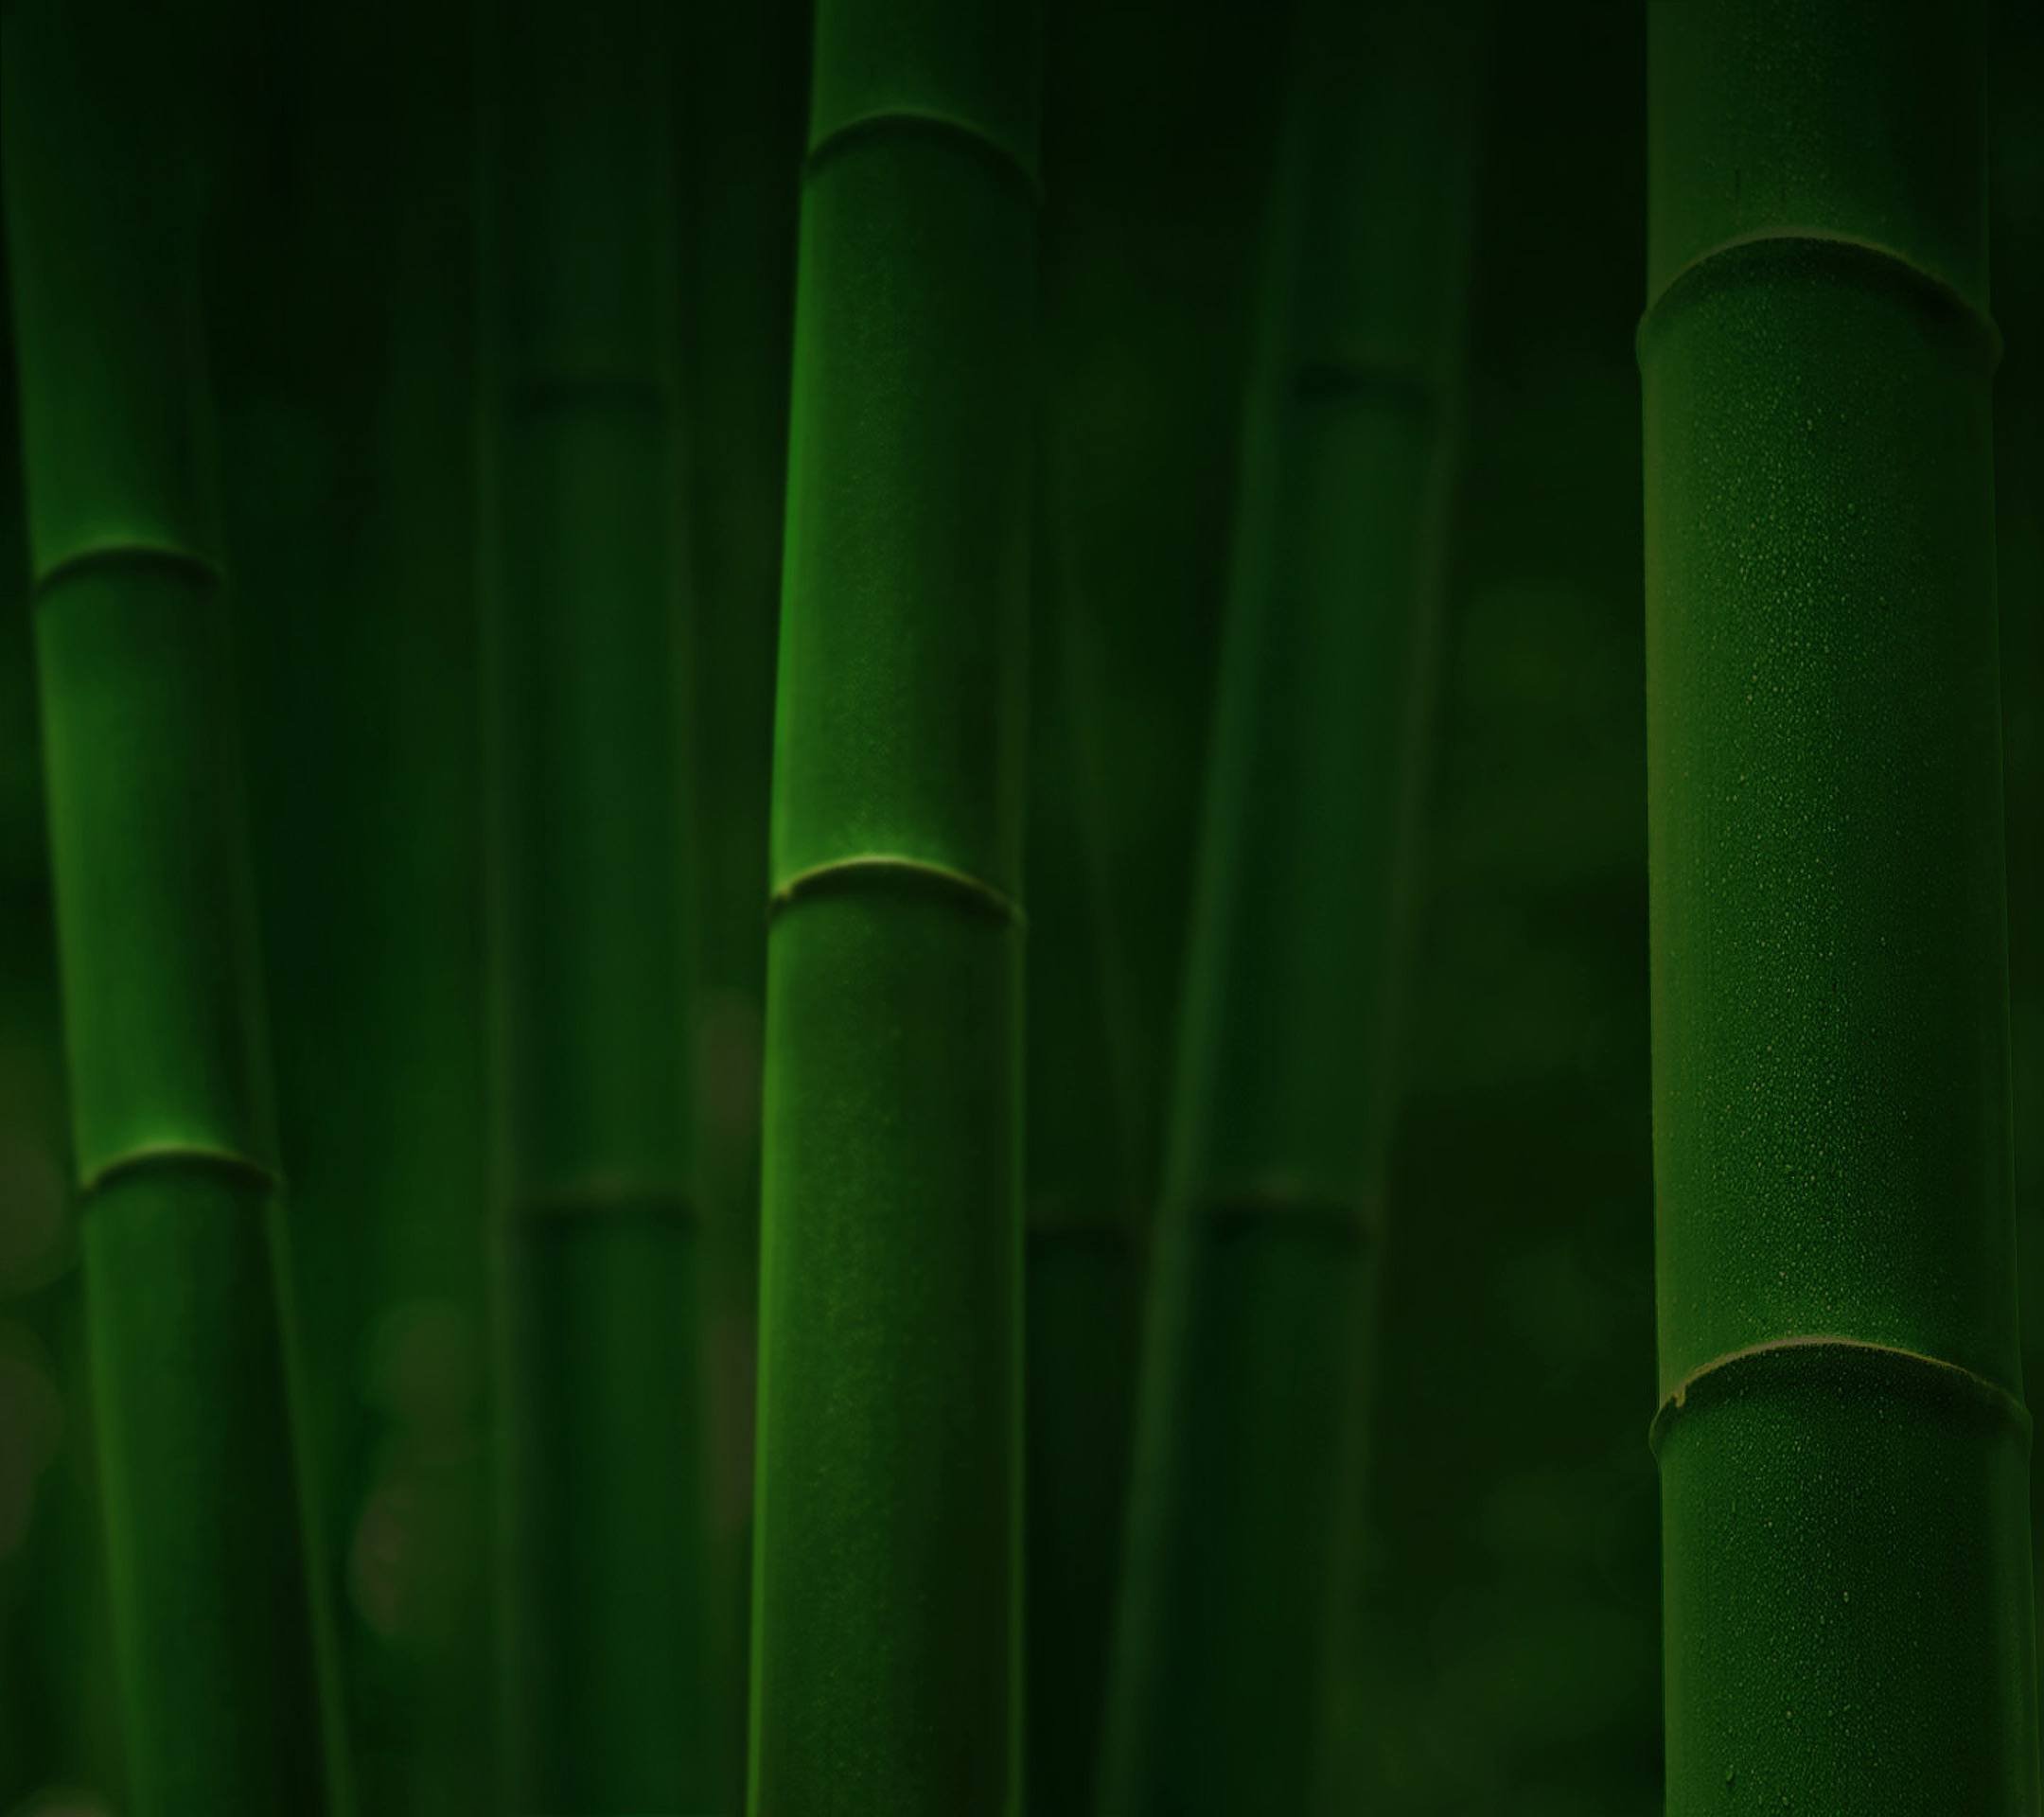 Bamboo 4K wallpapers for your desktop or mobile screen free and easy to  download